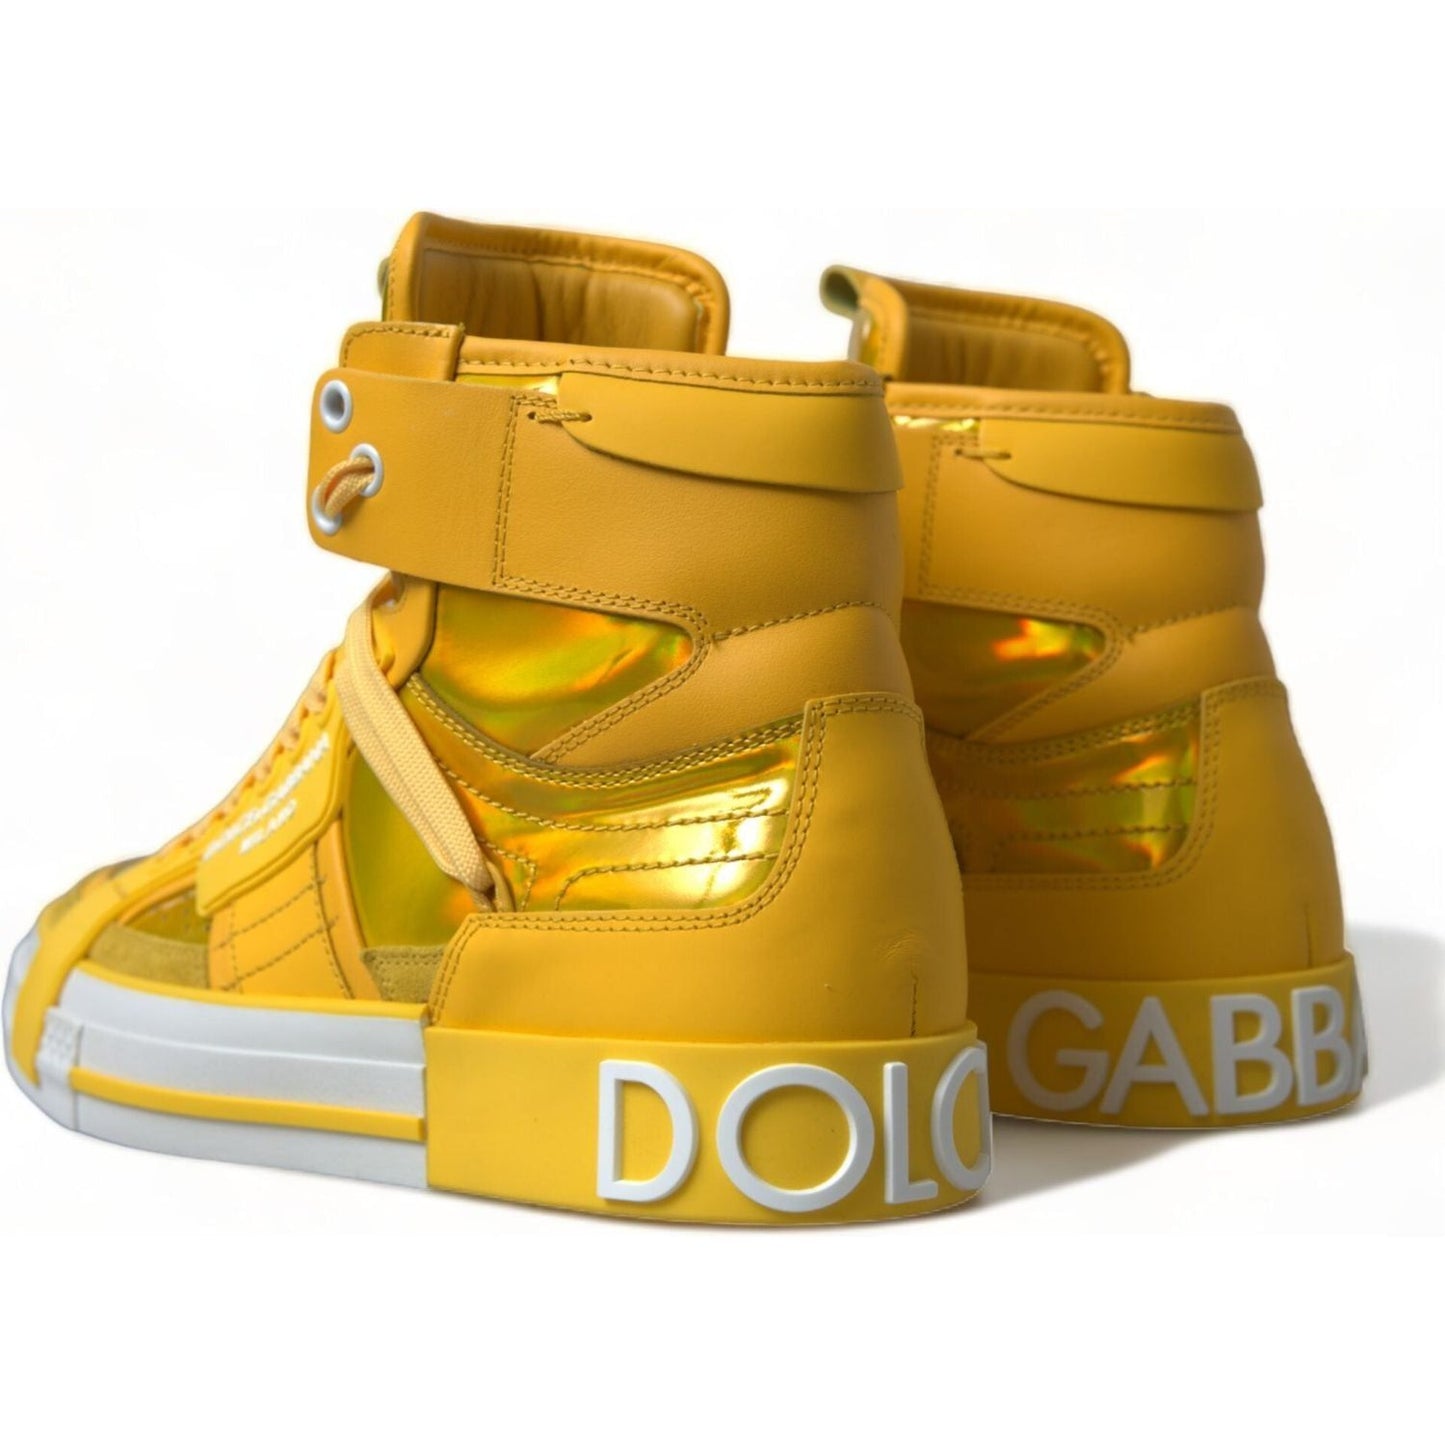 Dolce & Gabbana Chic High-Top Color-Block Sneakers yellow-white-leather-high-top-sneakers-shoes 465A2107-BG-scaled-b7625788-096.jpg